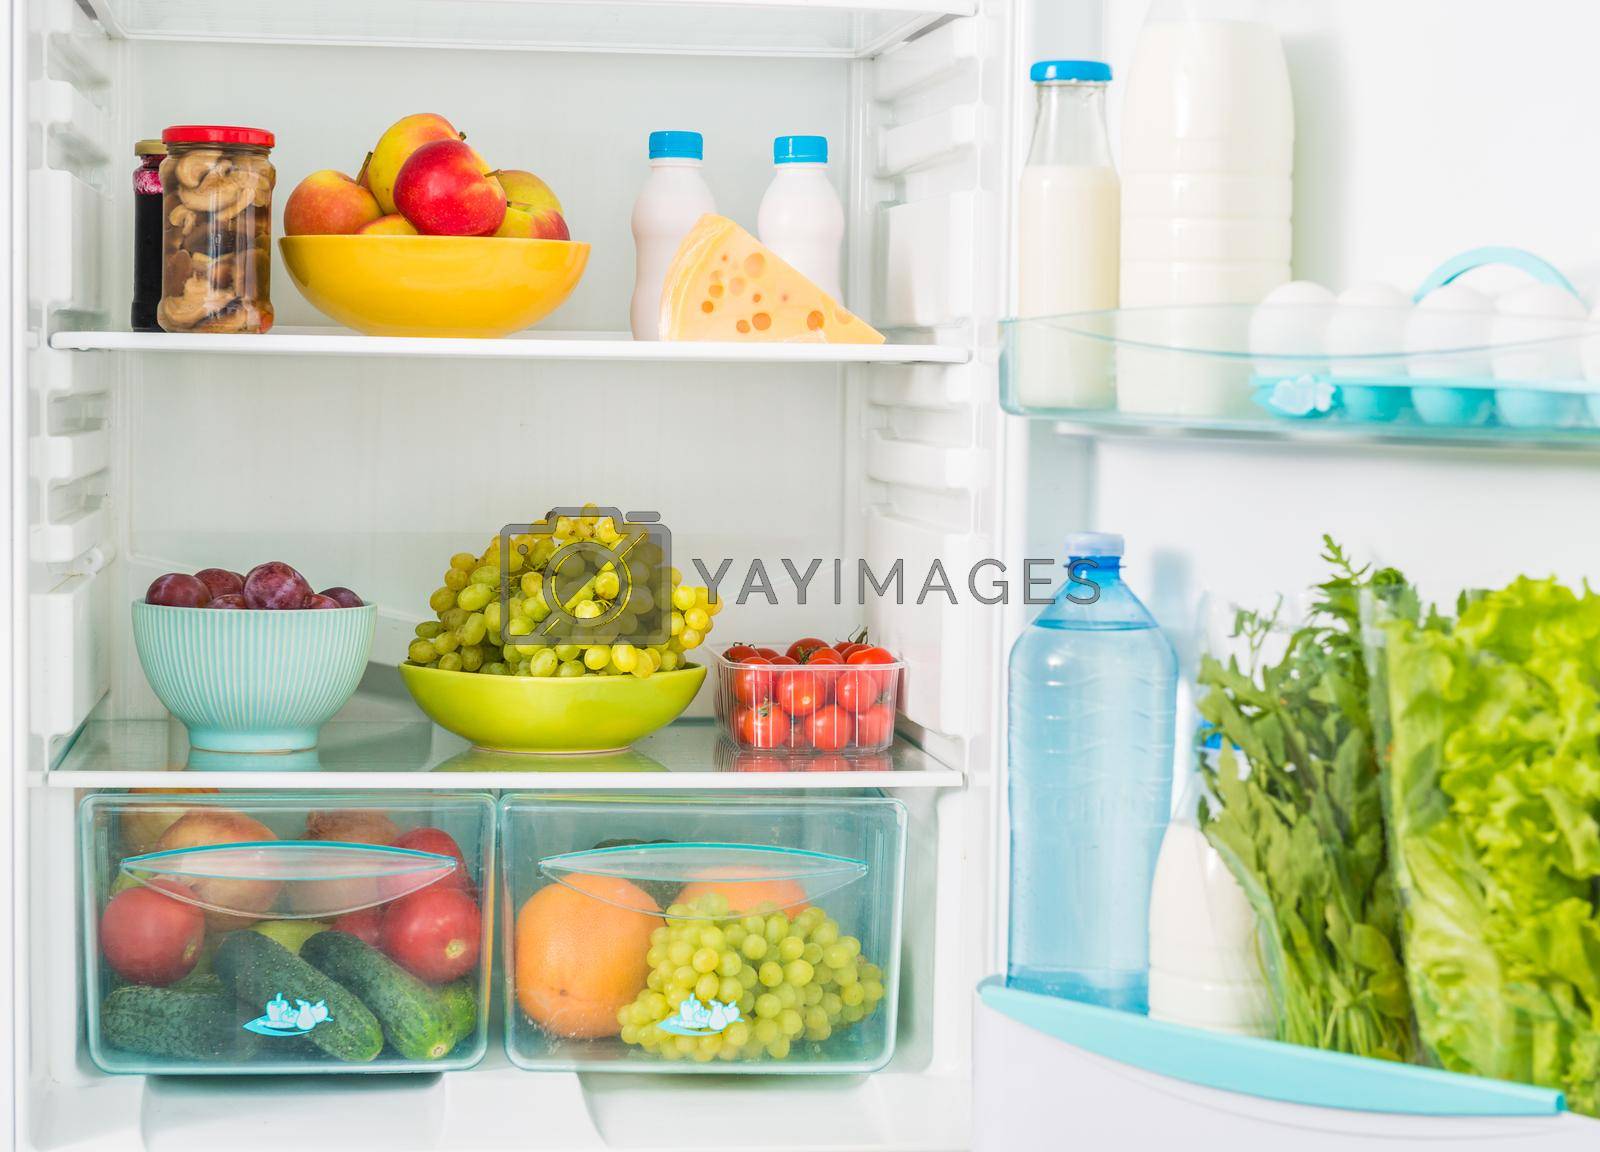 Royalty free image of fridge inseide with food by tan4ikk1